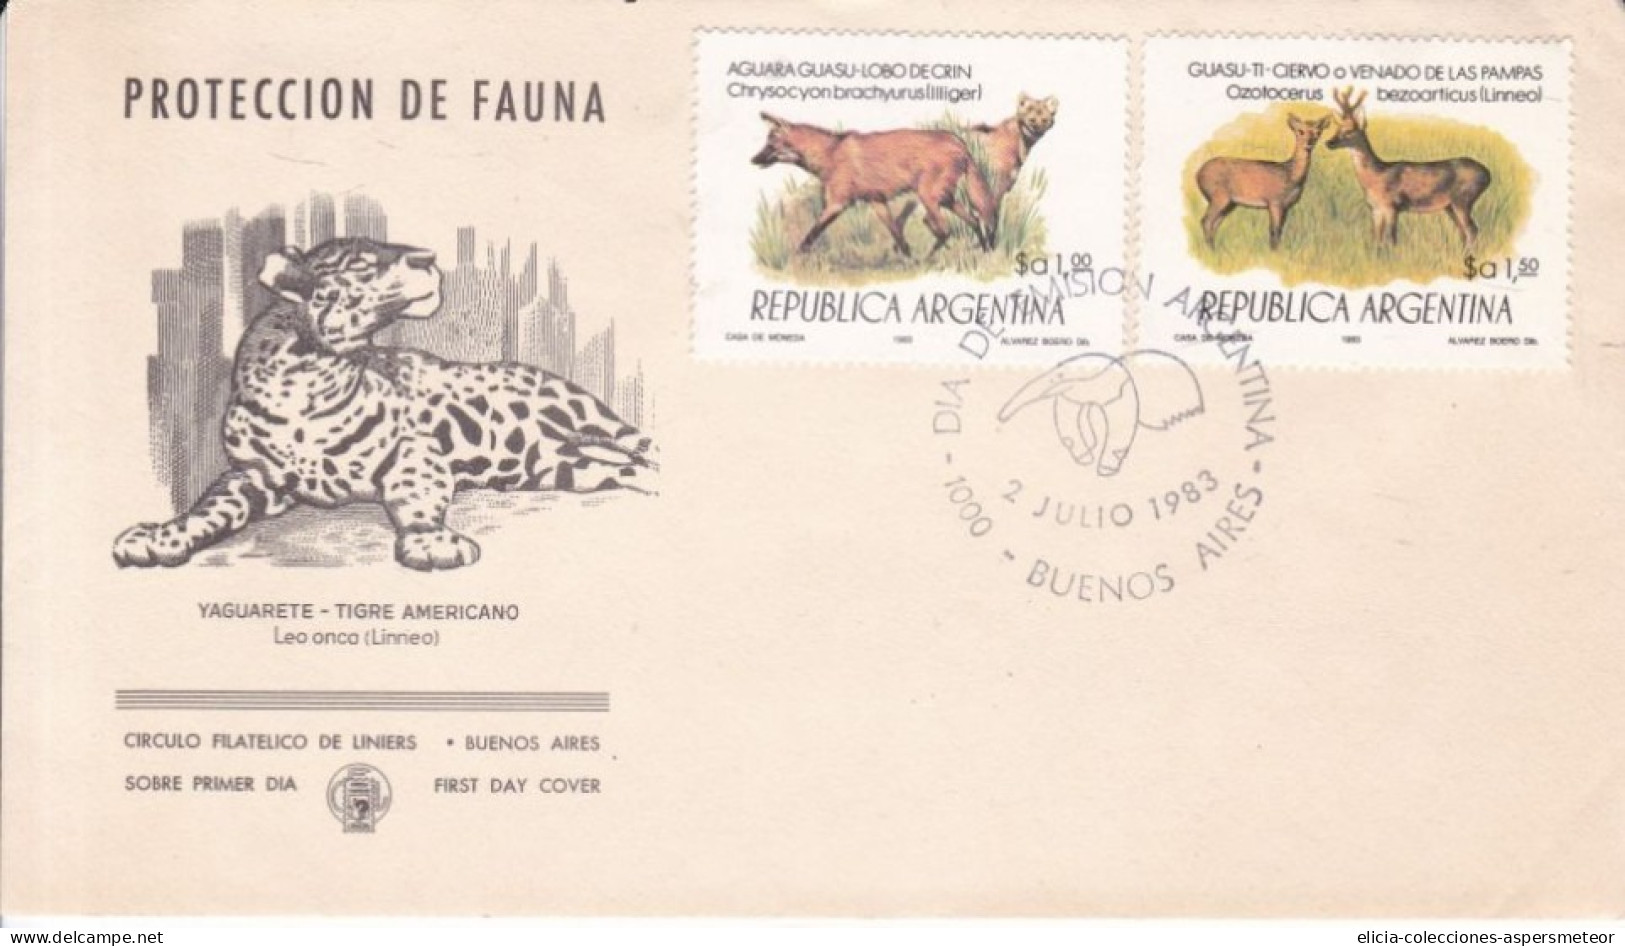 Argentina - 1983 - Envelope - First Day Issue Postmark - Fauna Protection -  Aguara Guasu And Guasu Ti Stamps - Caja 30 - Oblitérés